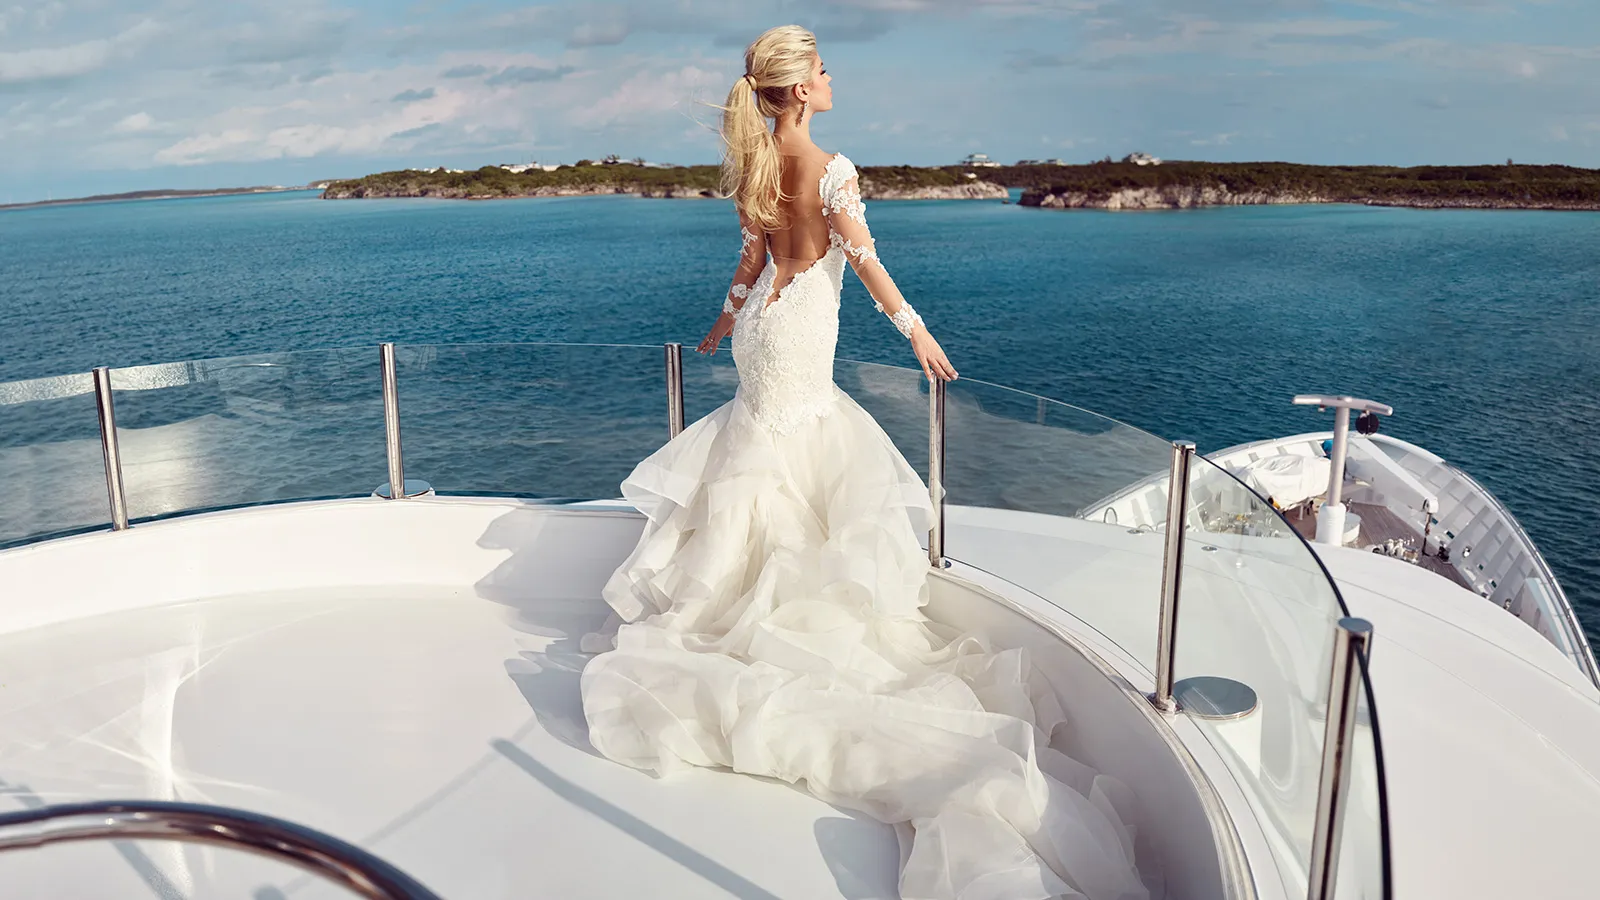 A Bride on her wedding gown standing on the upper deck